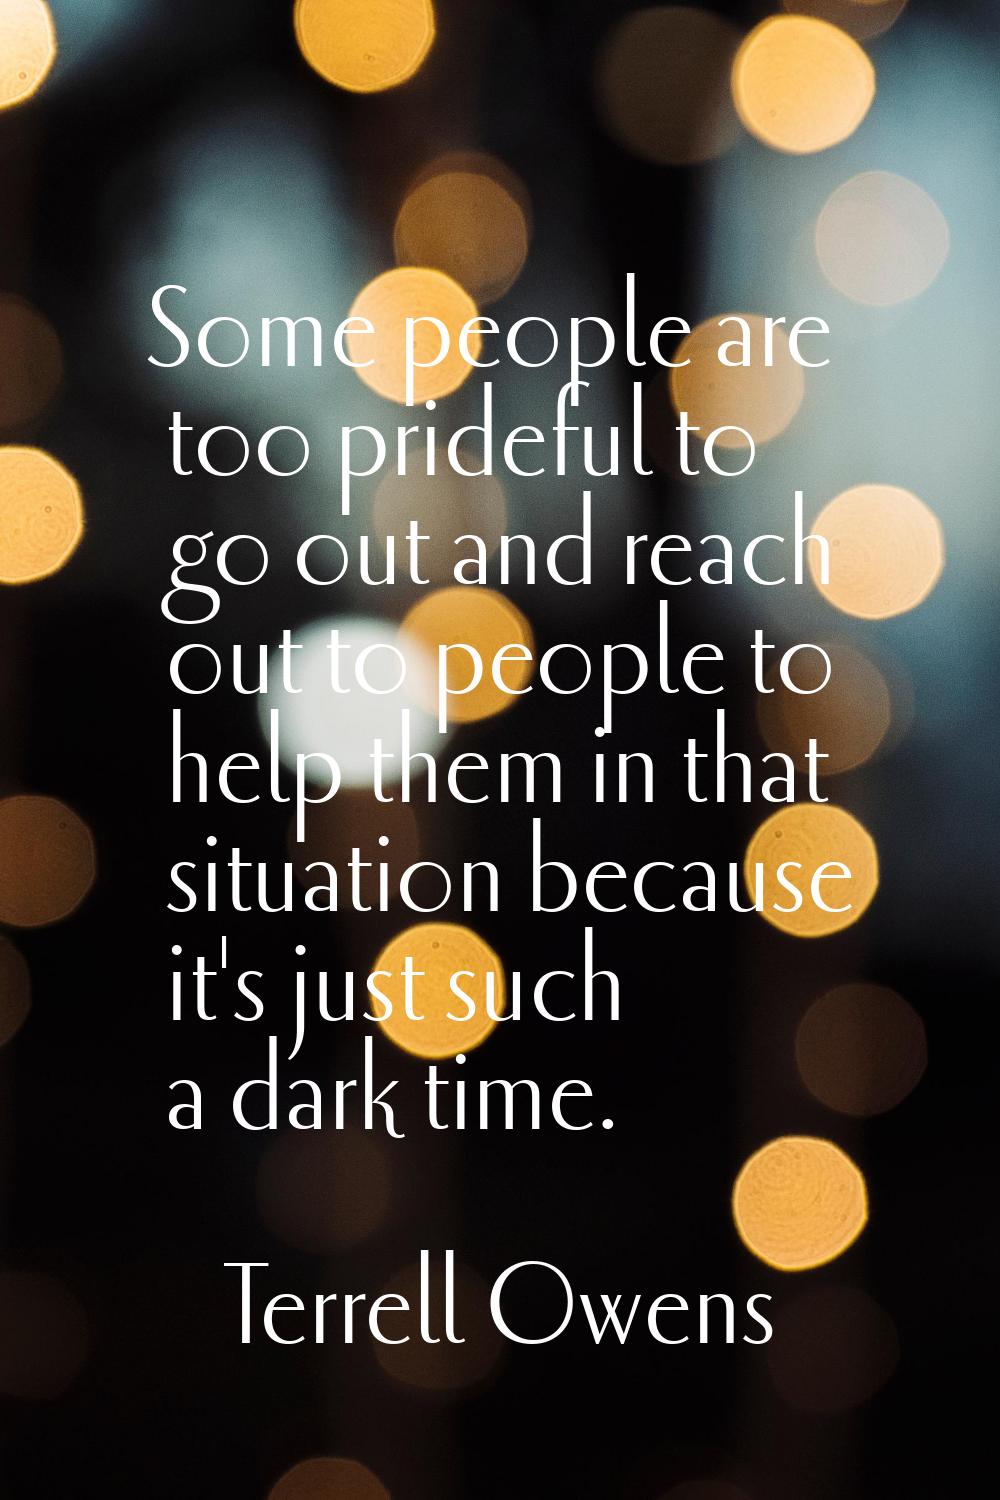 Some people are too prideful to go out and reach out to people to help them in that situation becau